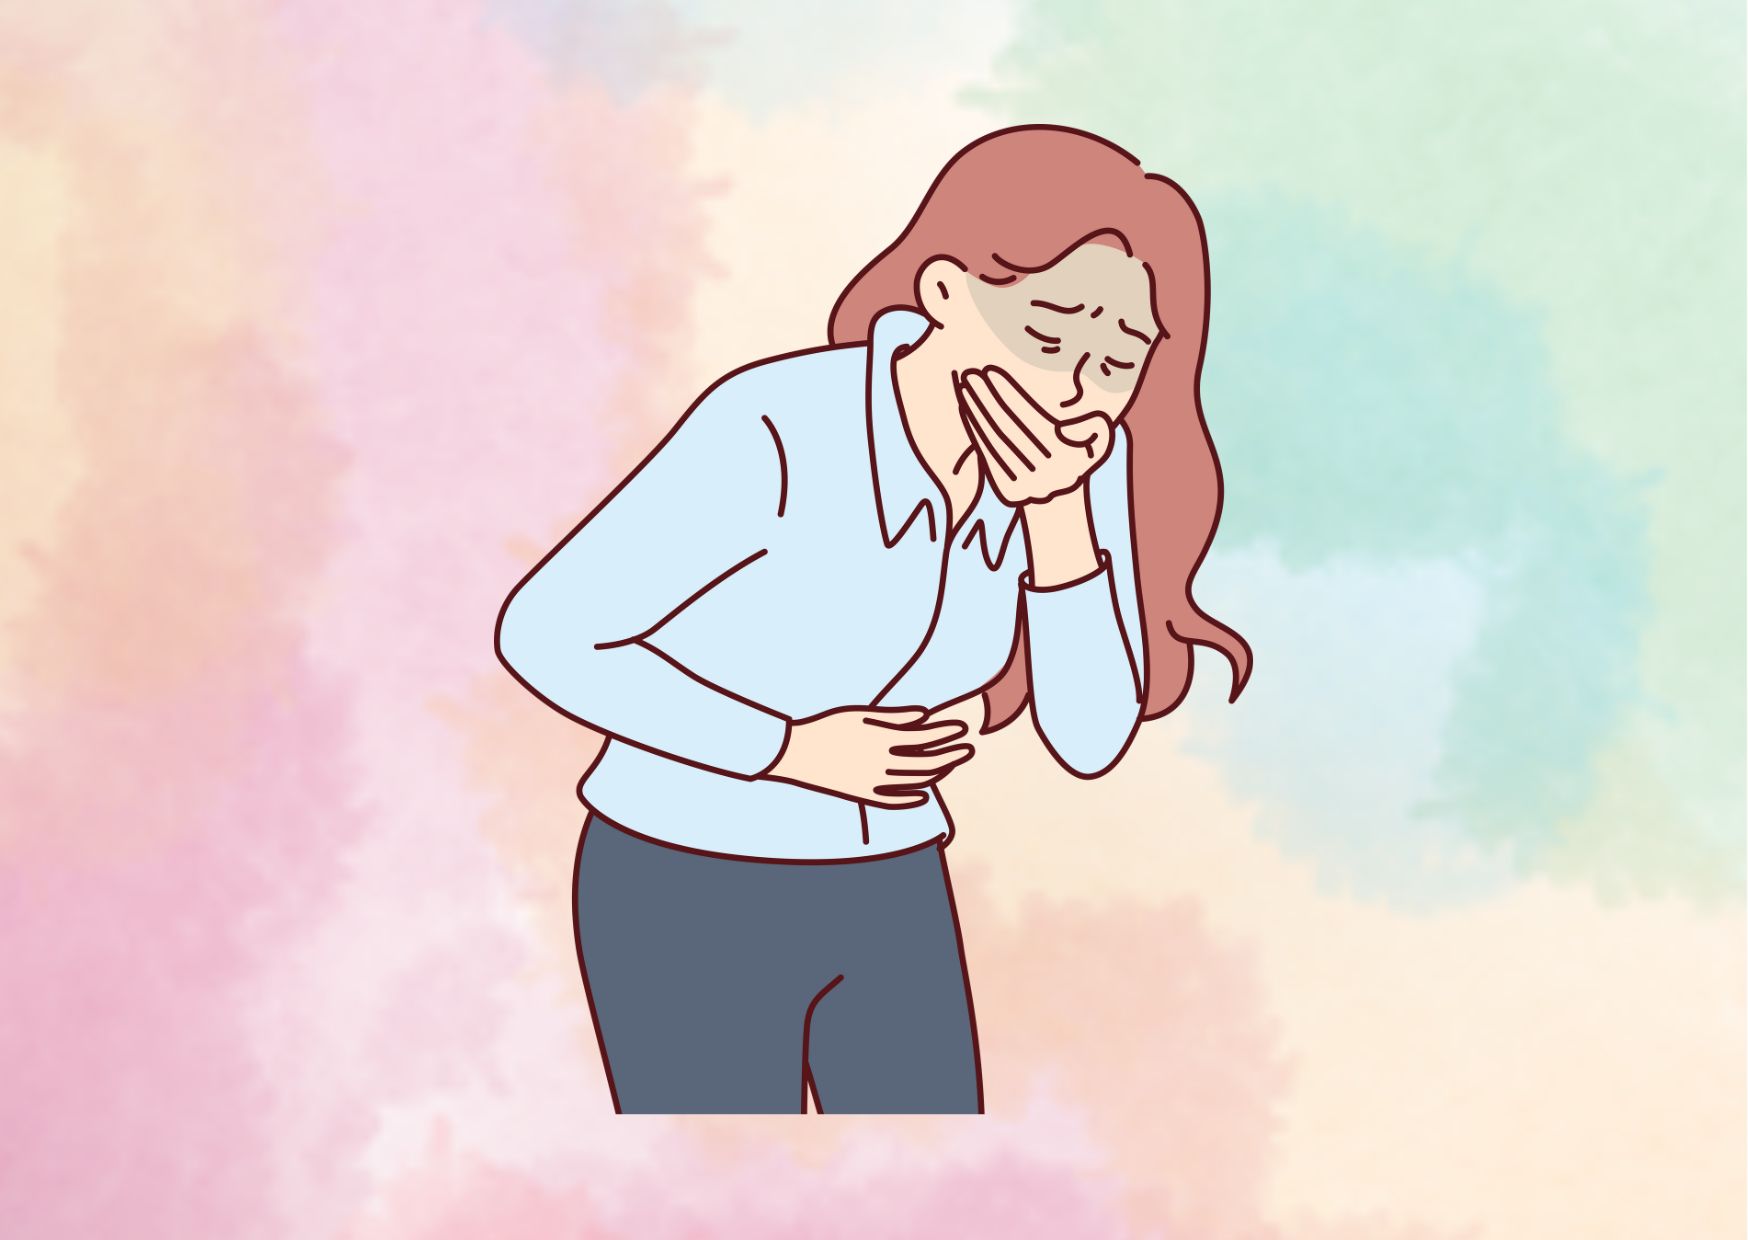 Emetophobia: Fear of Vomiting